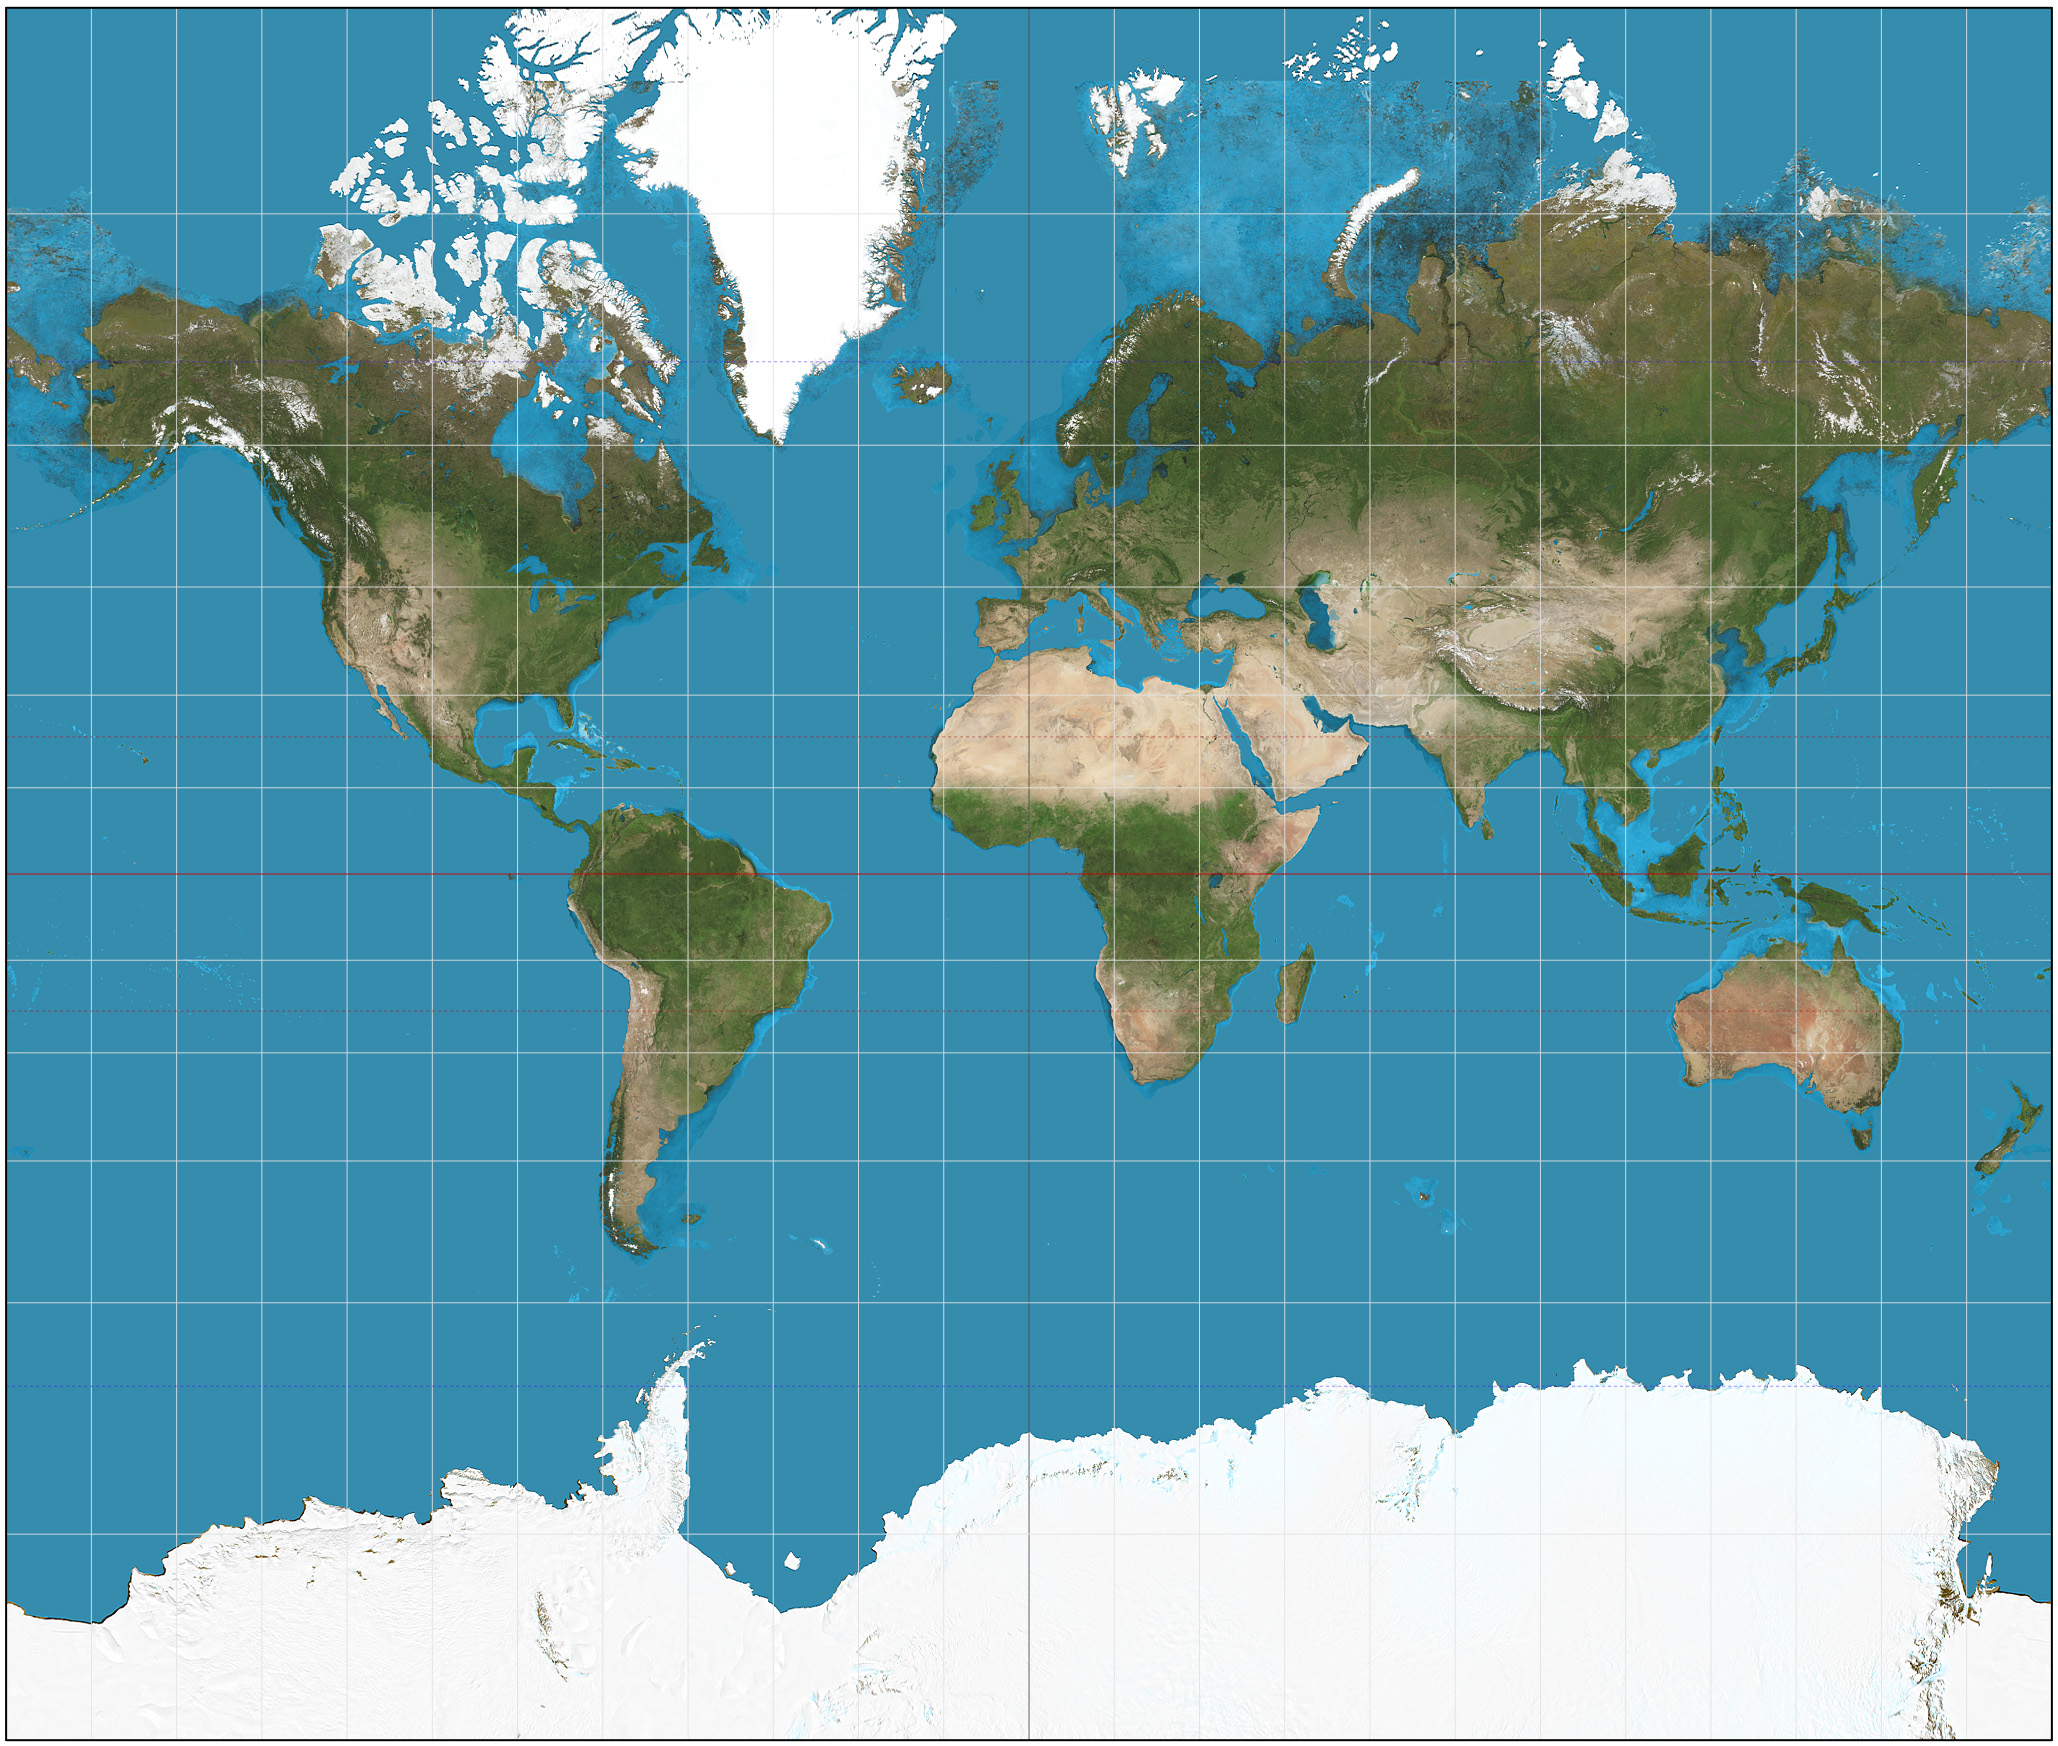 Which map projection is the most widely used or most popular?